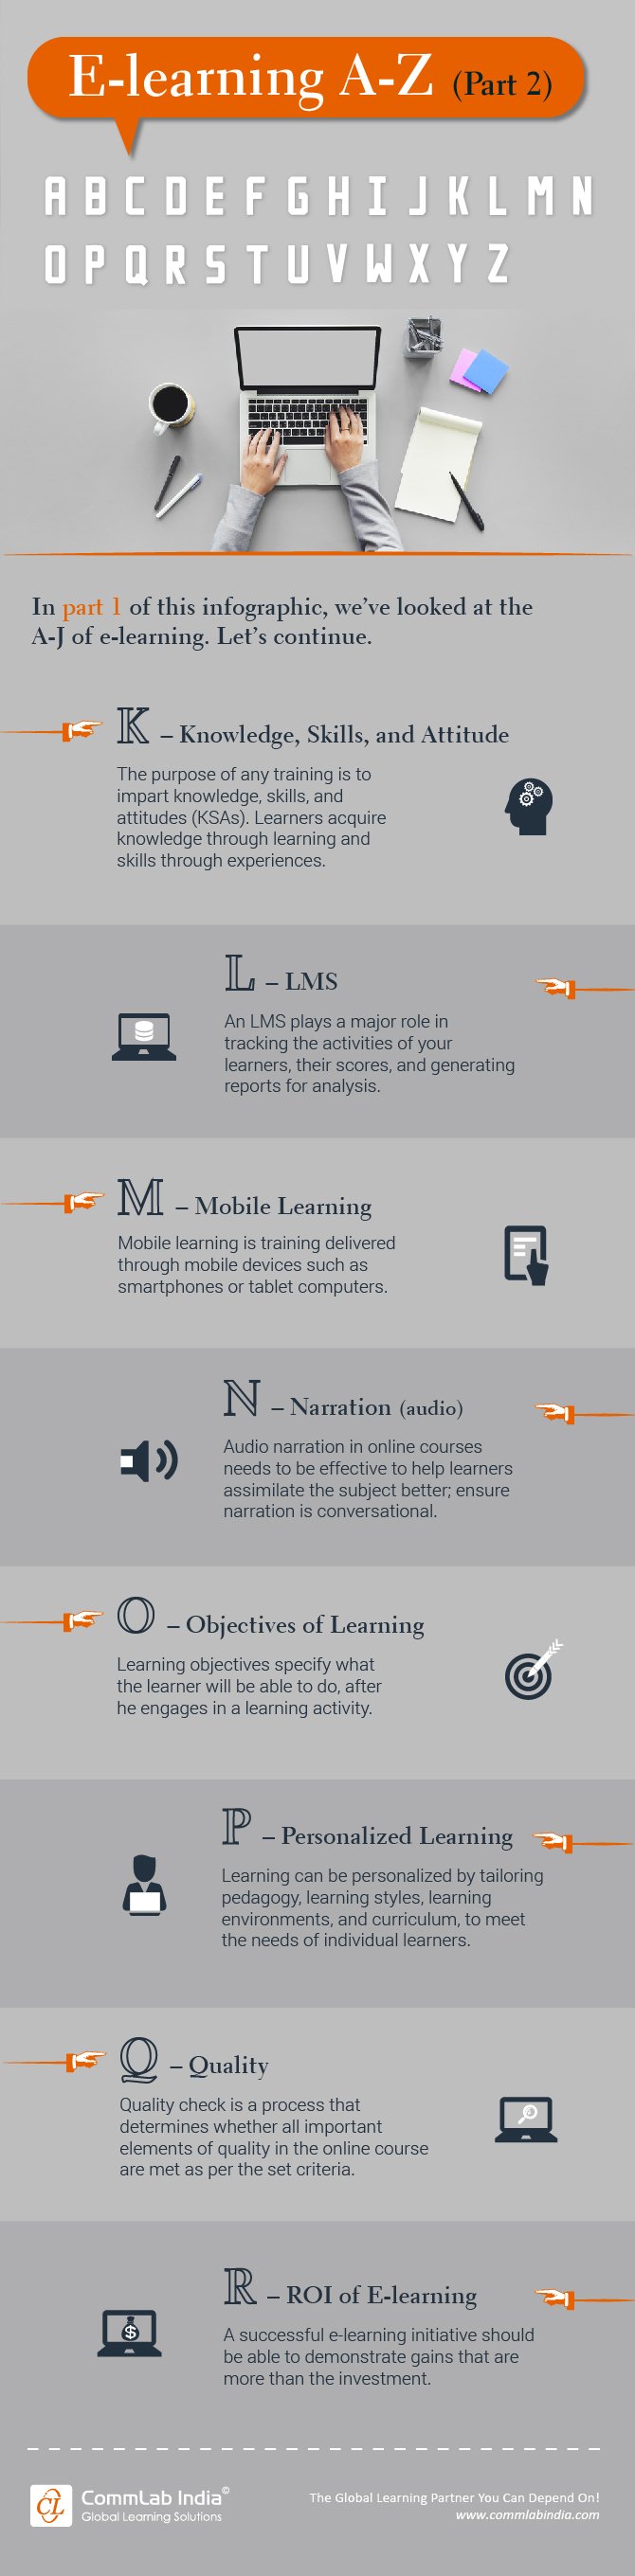 E-learning A-Z Terms: Part 2 [Infographic]